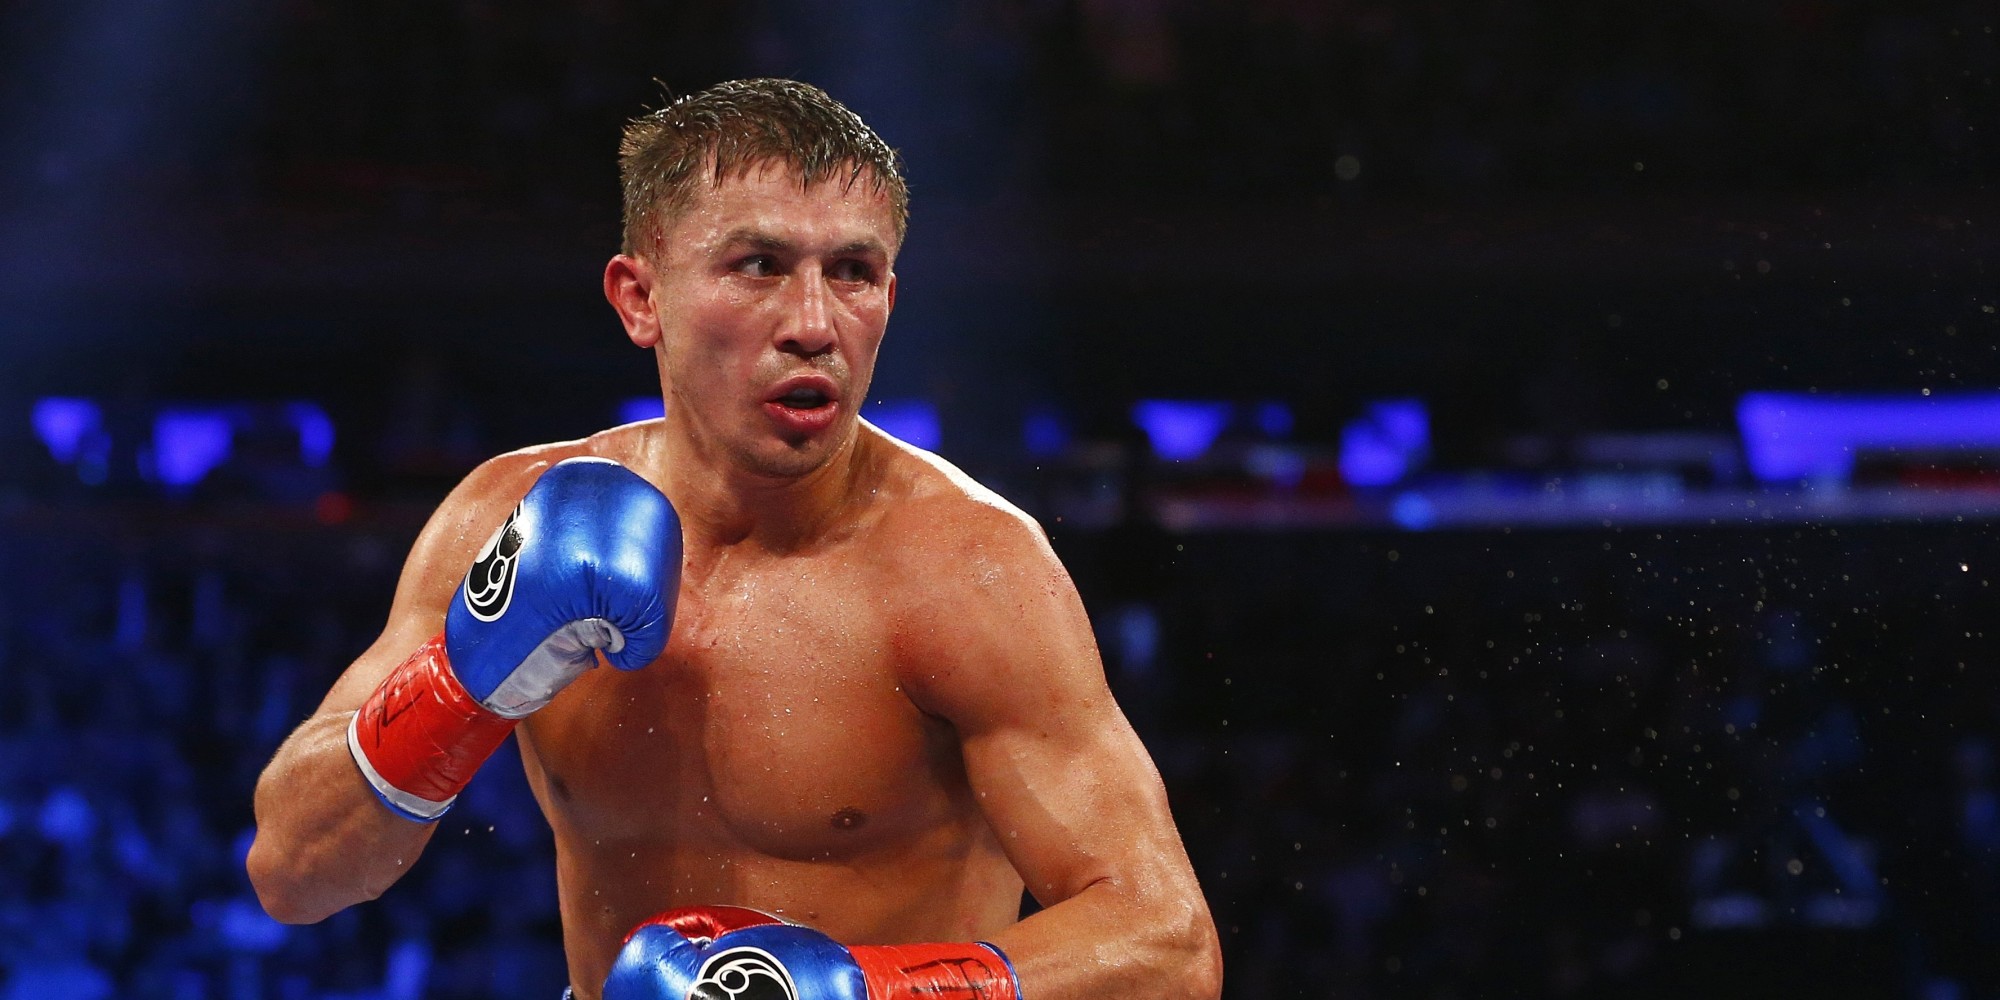 Gennady Golovkin in action against David Lemieux in a World middleweight championship title unification bout at Madison Square Garden in New York on Saturday Oct. 17 2015. Golovkin won by a TKO in the eighth round